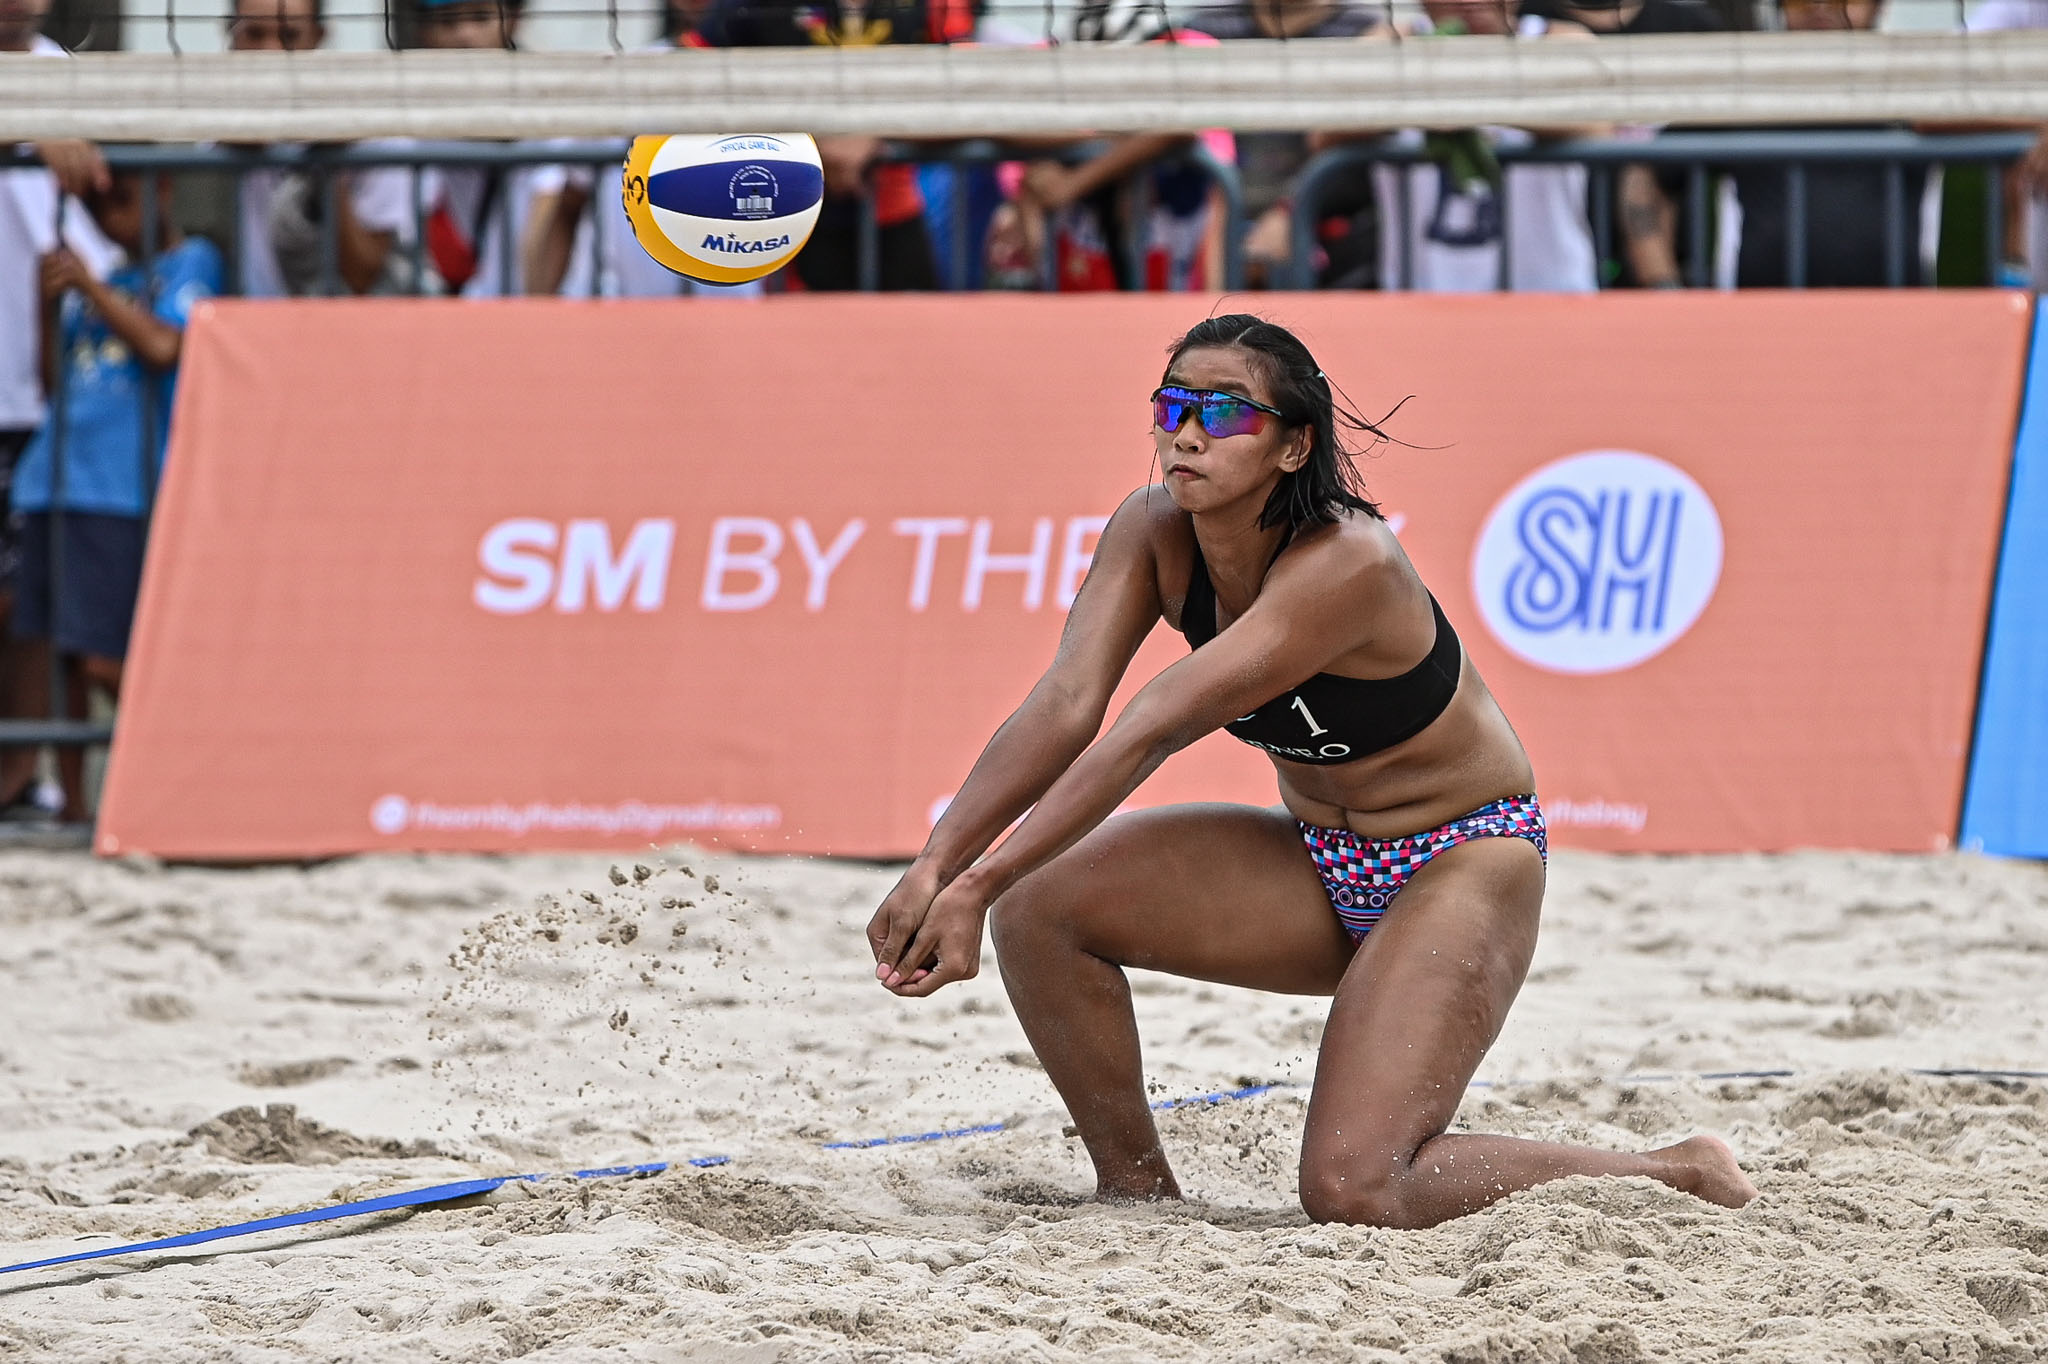 UAAP-WBVB-Pia-Ildefonso-1528 Pia Ildefonso sits out UAAP 85: 'I'm choosing to fight life’s battles outside the sport' ADMU News UAAP Volleyball  - philippine sports news